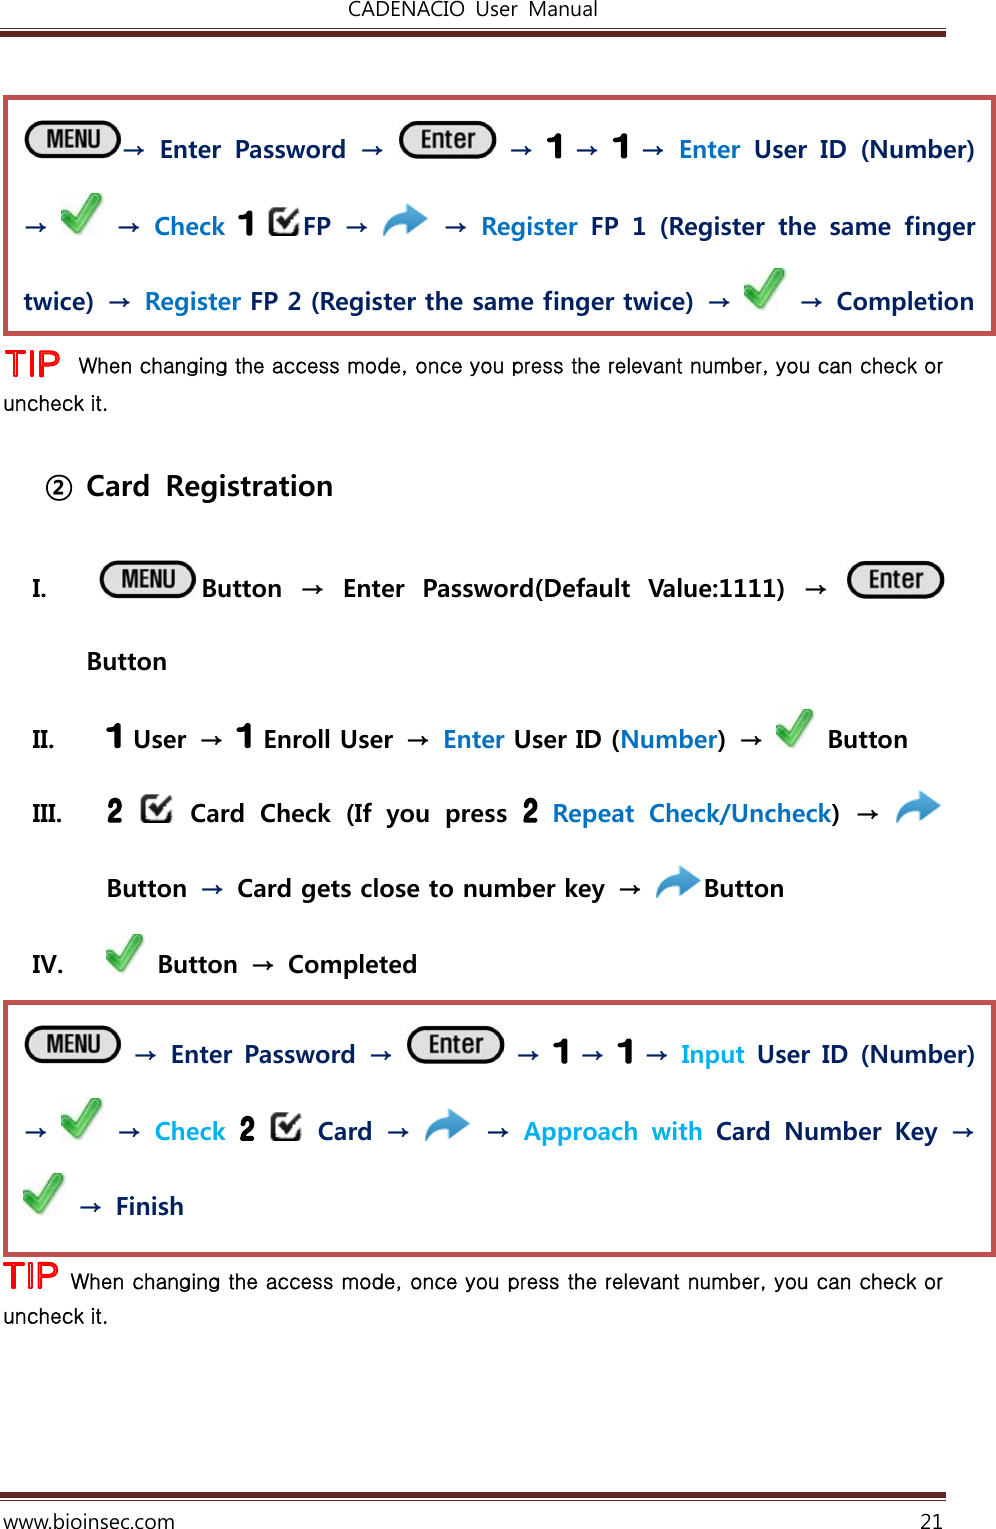 CADENACIO  User  Manual  www.bioinsec.com 21   When changing the access mode, once you press the relevant number, you can check or uncheck it.  ② Card  Registration  I.  Button  →  Enter  Password(Default  Value:1111)  →   Button II.  User →   Enroll User → Enter User ID (Number)  →    Button   III.    Card  Check  (If  you  press   Repeat  Check/Uncheck)  →   Button  →  Card gets close to number key  →  Button   IV.   Button  →  Completed   When changing the access mode, once you press the relevant number, you can check or uncheck it.    → Enter Password →   →   →   → Input User ID  (Number) →   → Check    Card →   → Approach  with  Card  Number  Key  →   →  Finish →  Enter  Password  →   →   →   → Enter  User  ID  (Number) →   → Check   FP  →   → Register  FP 1 (Register the same finger twice)  →  Register FP 2 (Register the same finger twice)  →   → Completion